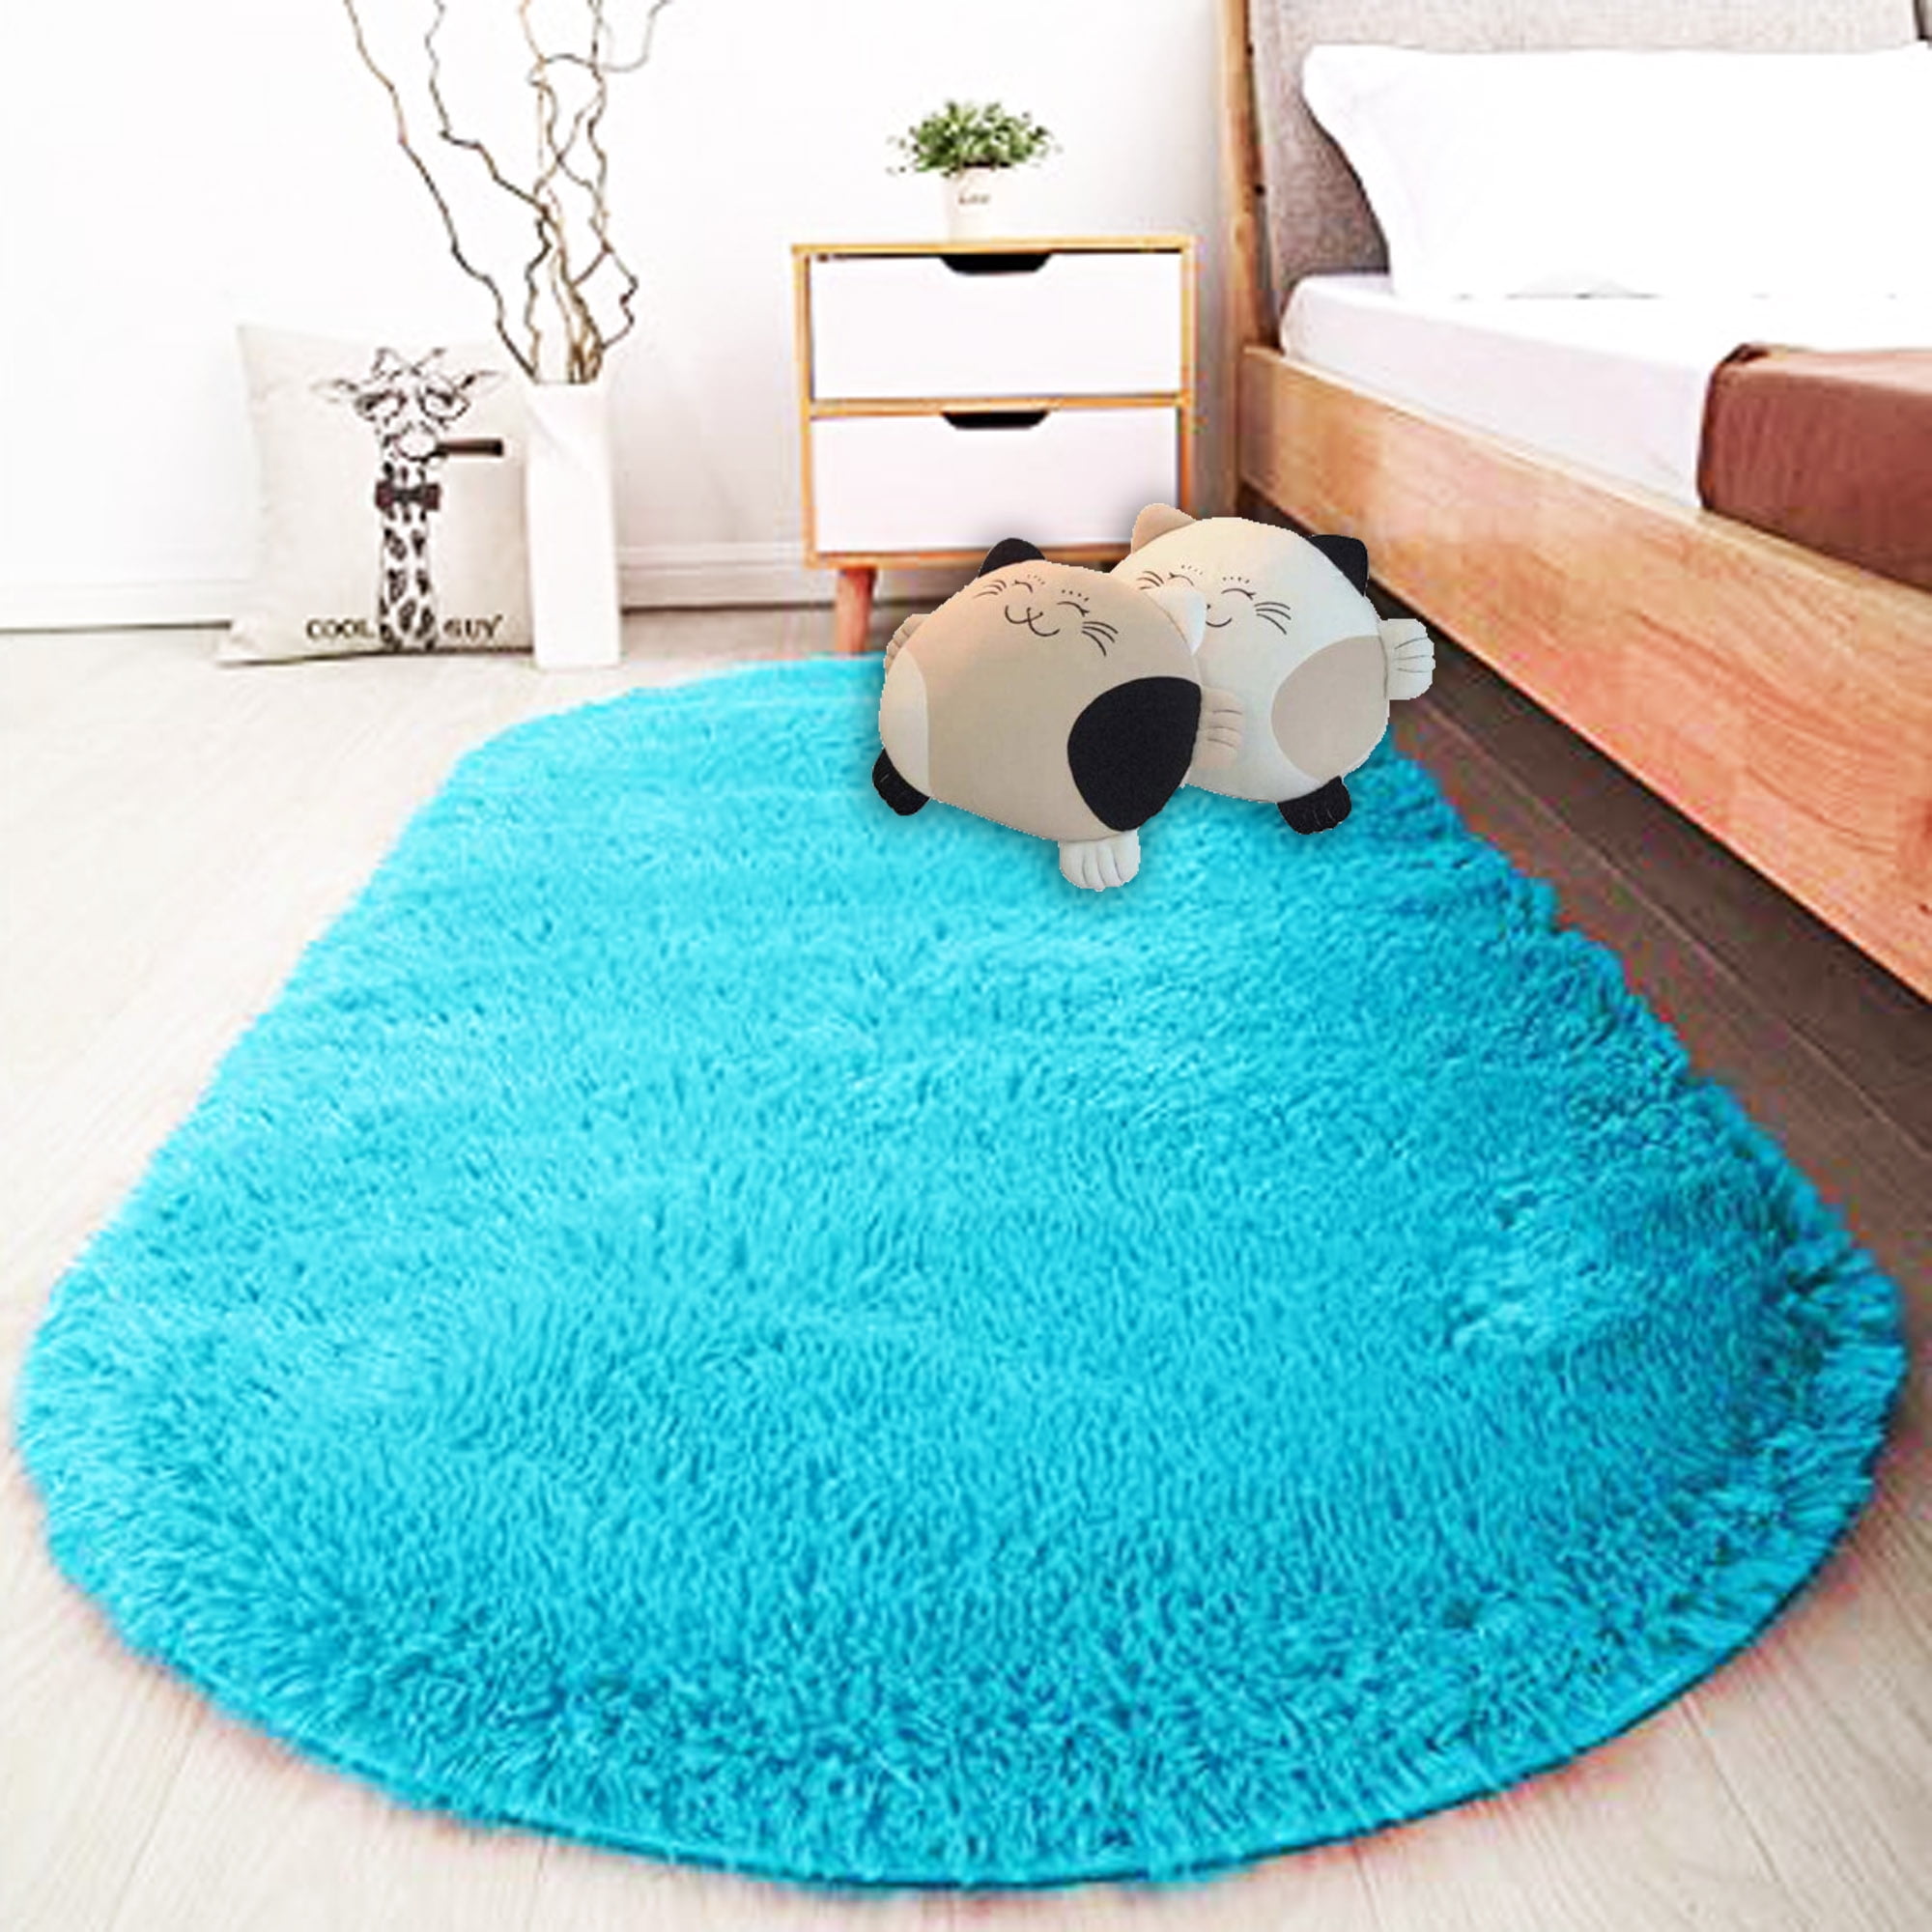 80 X 165cm Fluffy Area Rugs For Bedroom, Rugs For Girls Room